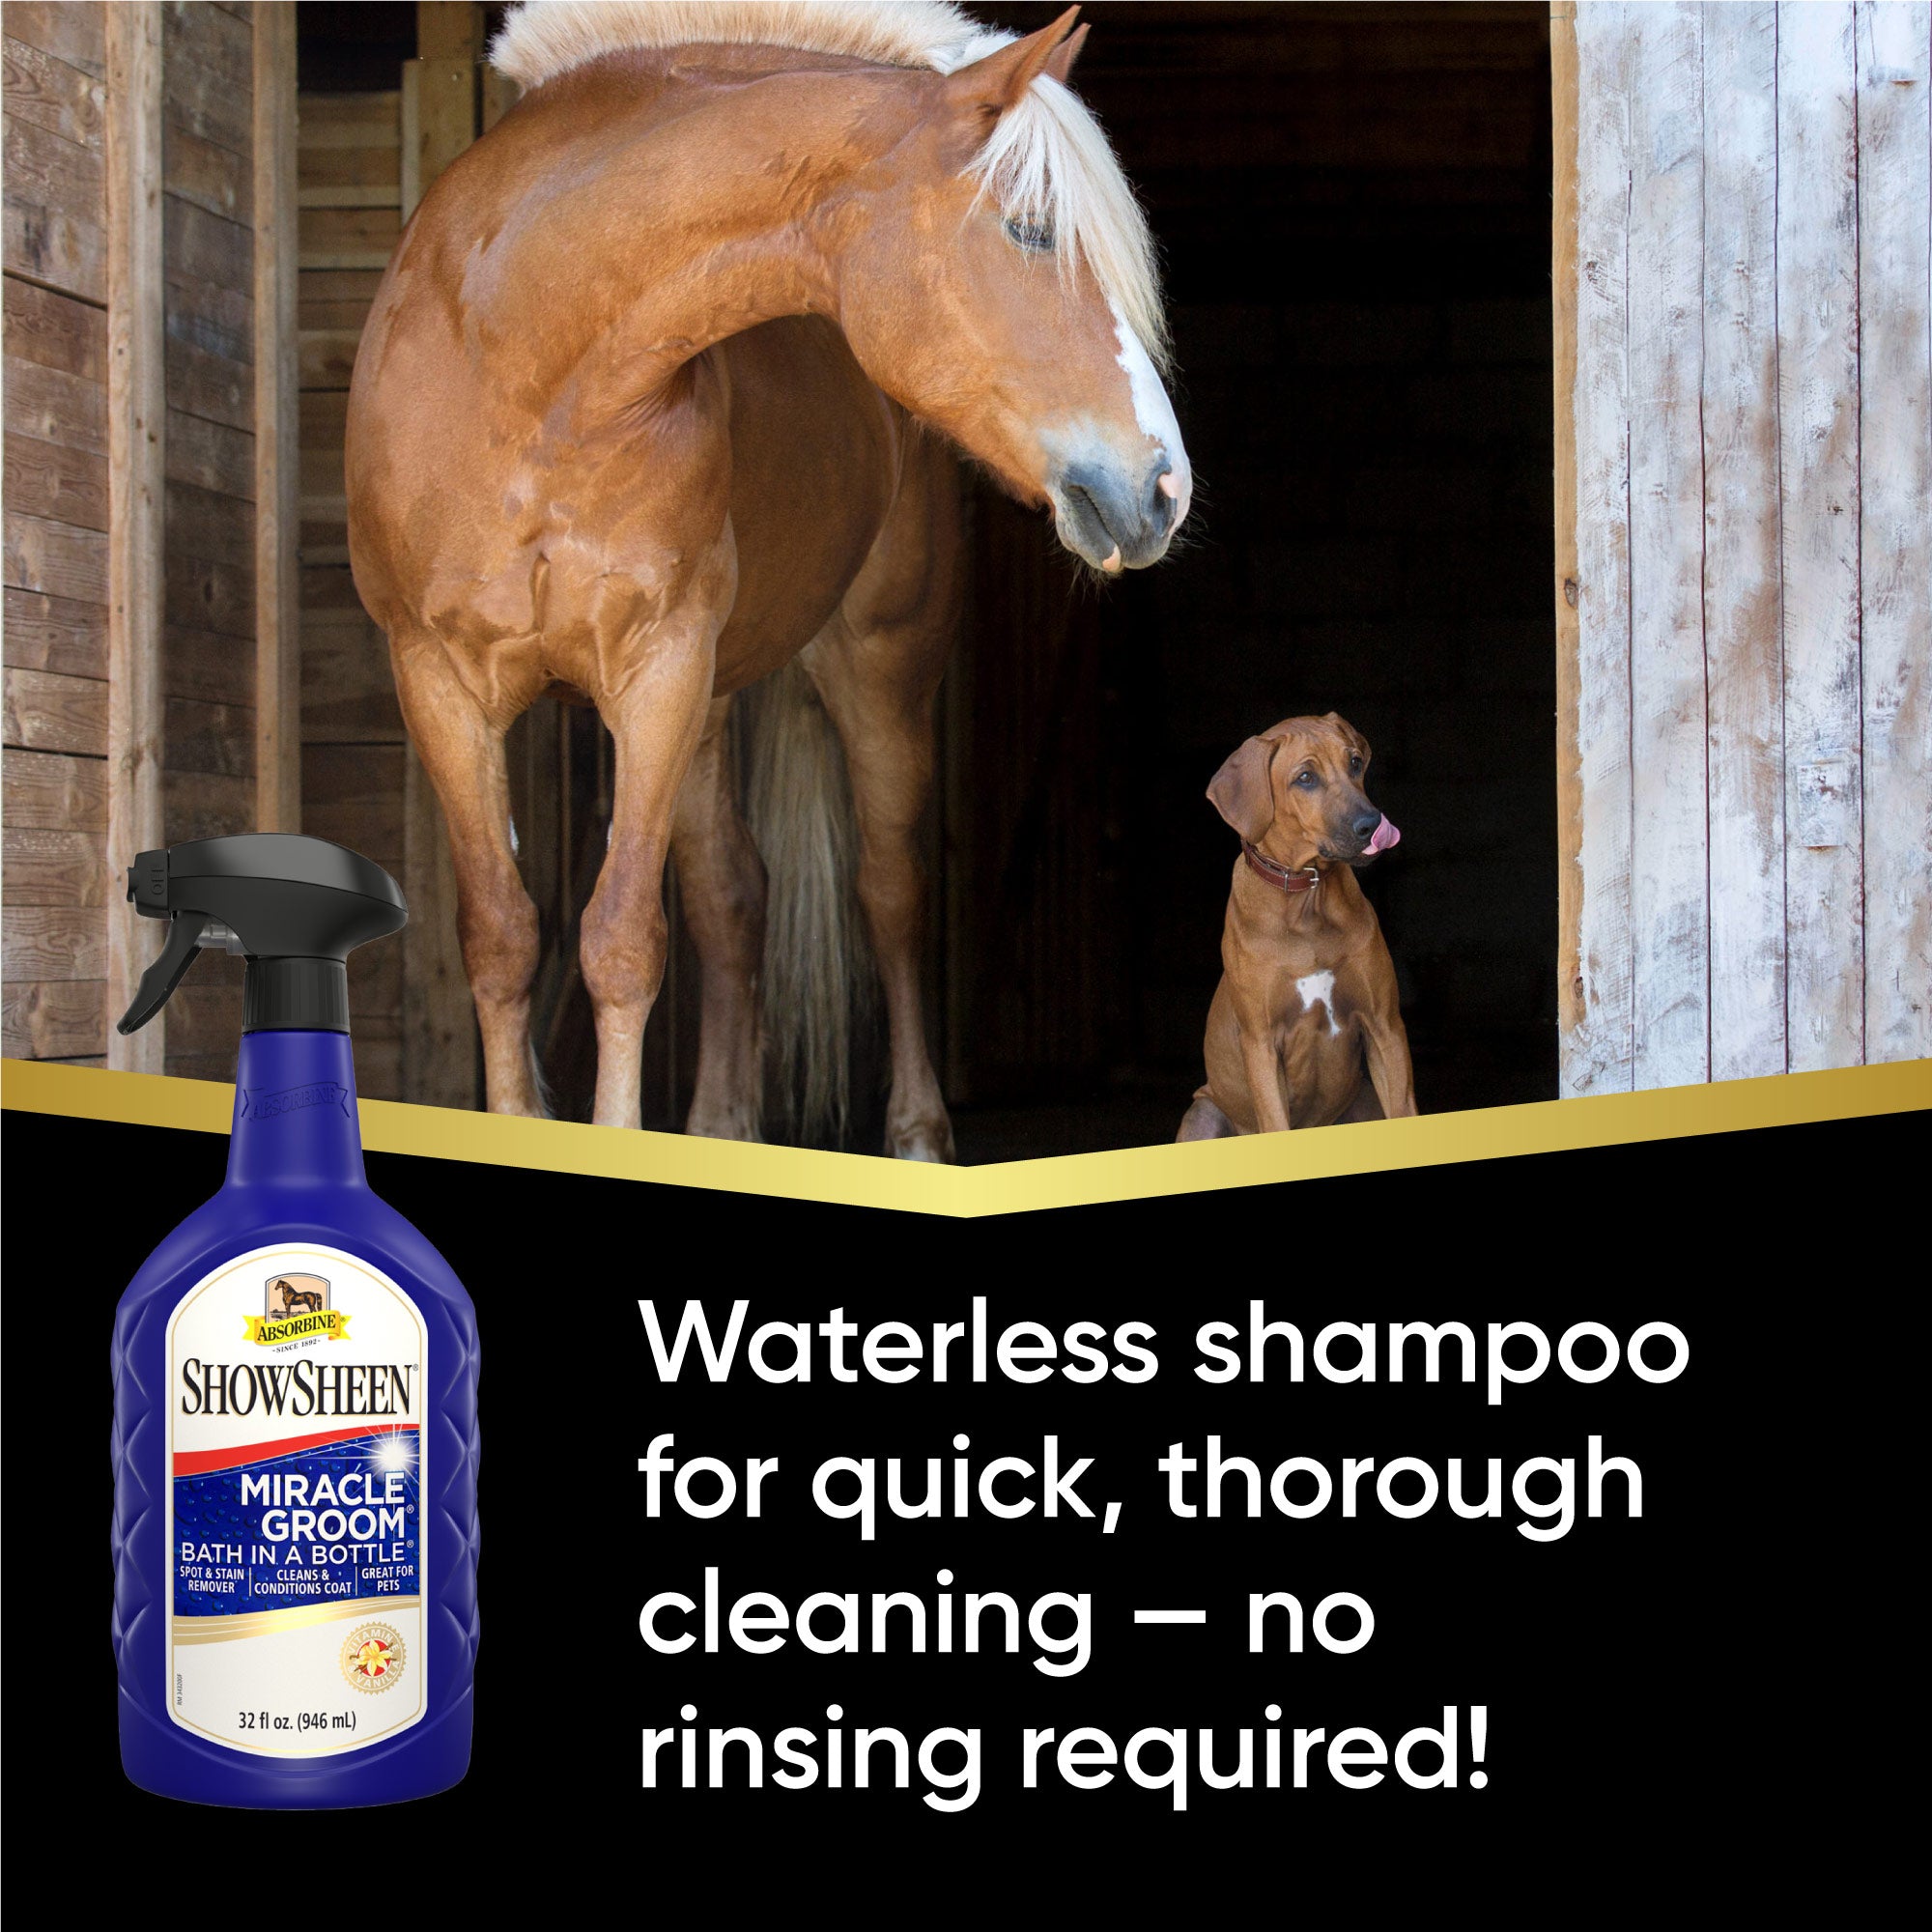 Chestnut brown horse with a tan mane, standing next to a dog in a barn doorway.  Showsheen Miracle Groom Bath in a Bottle.  Waterless shampoo for quick, thorough cleaning - no rinsing required!